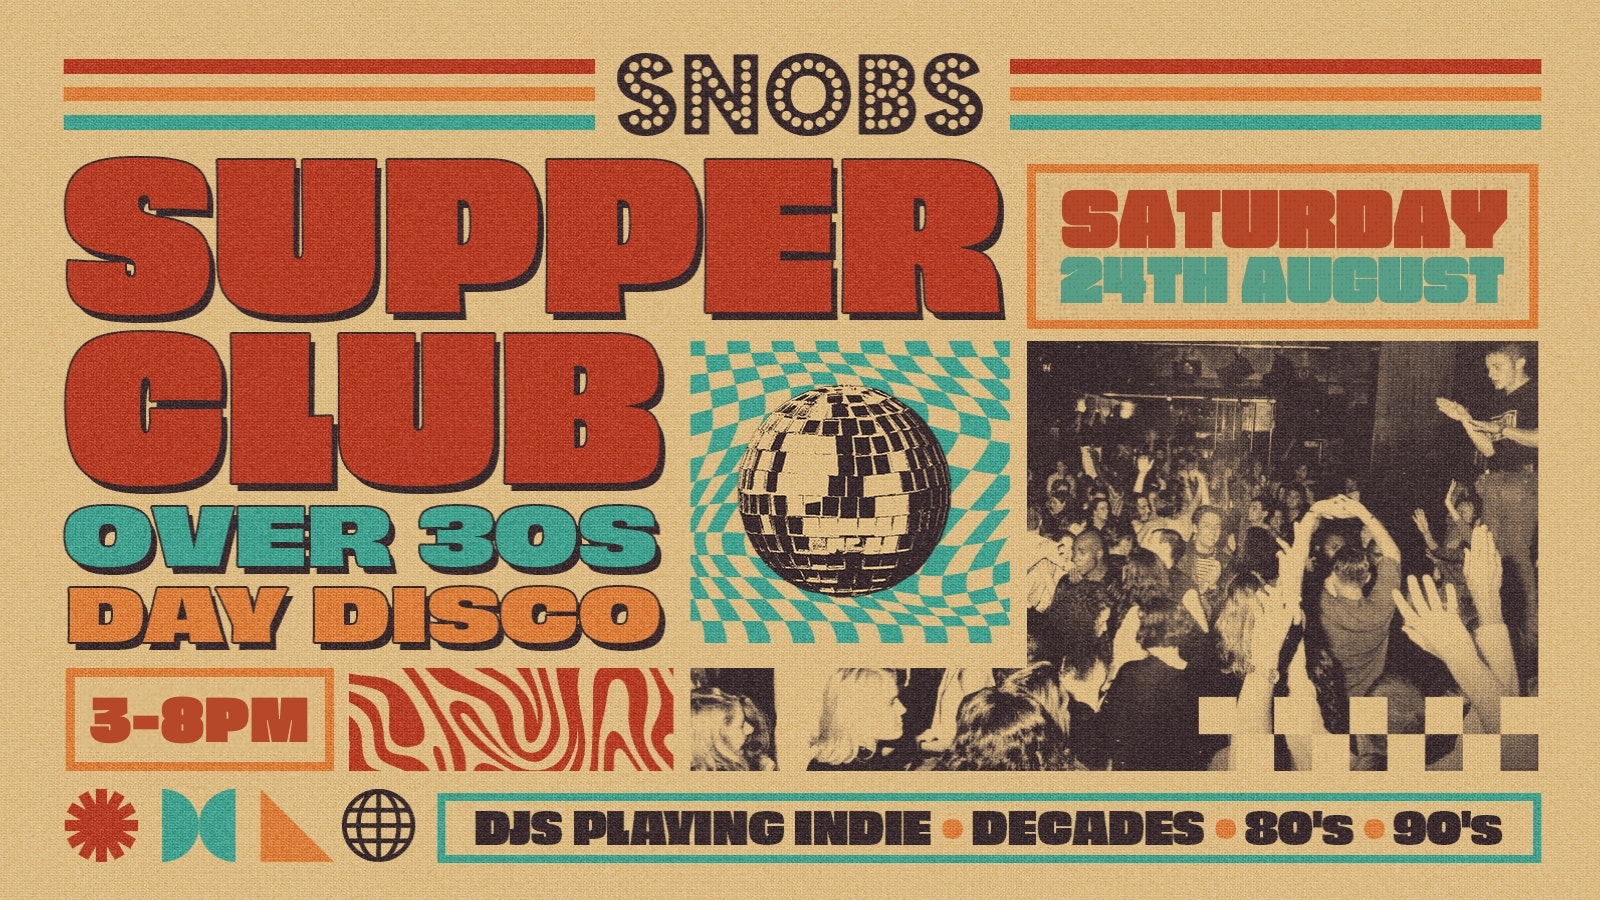 SNOBS SUPPER CLUB – Over 30’s Day Disco [24TH AUGUST]